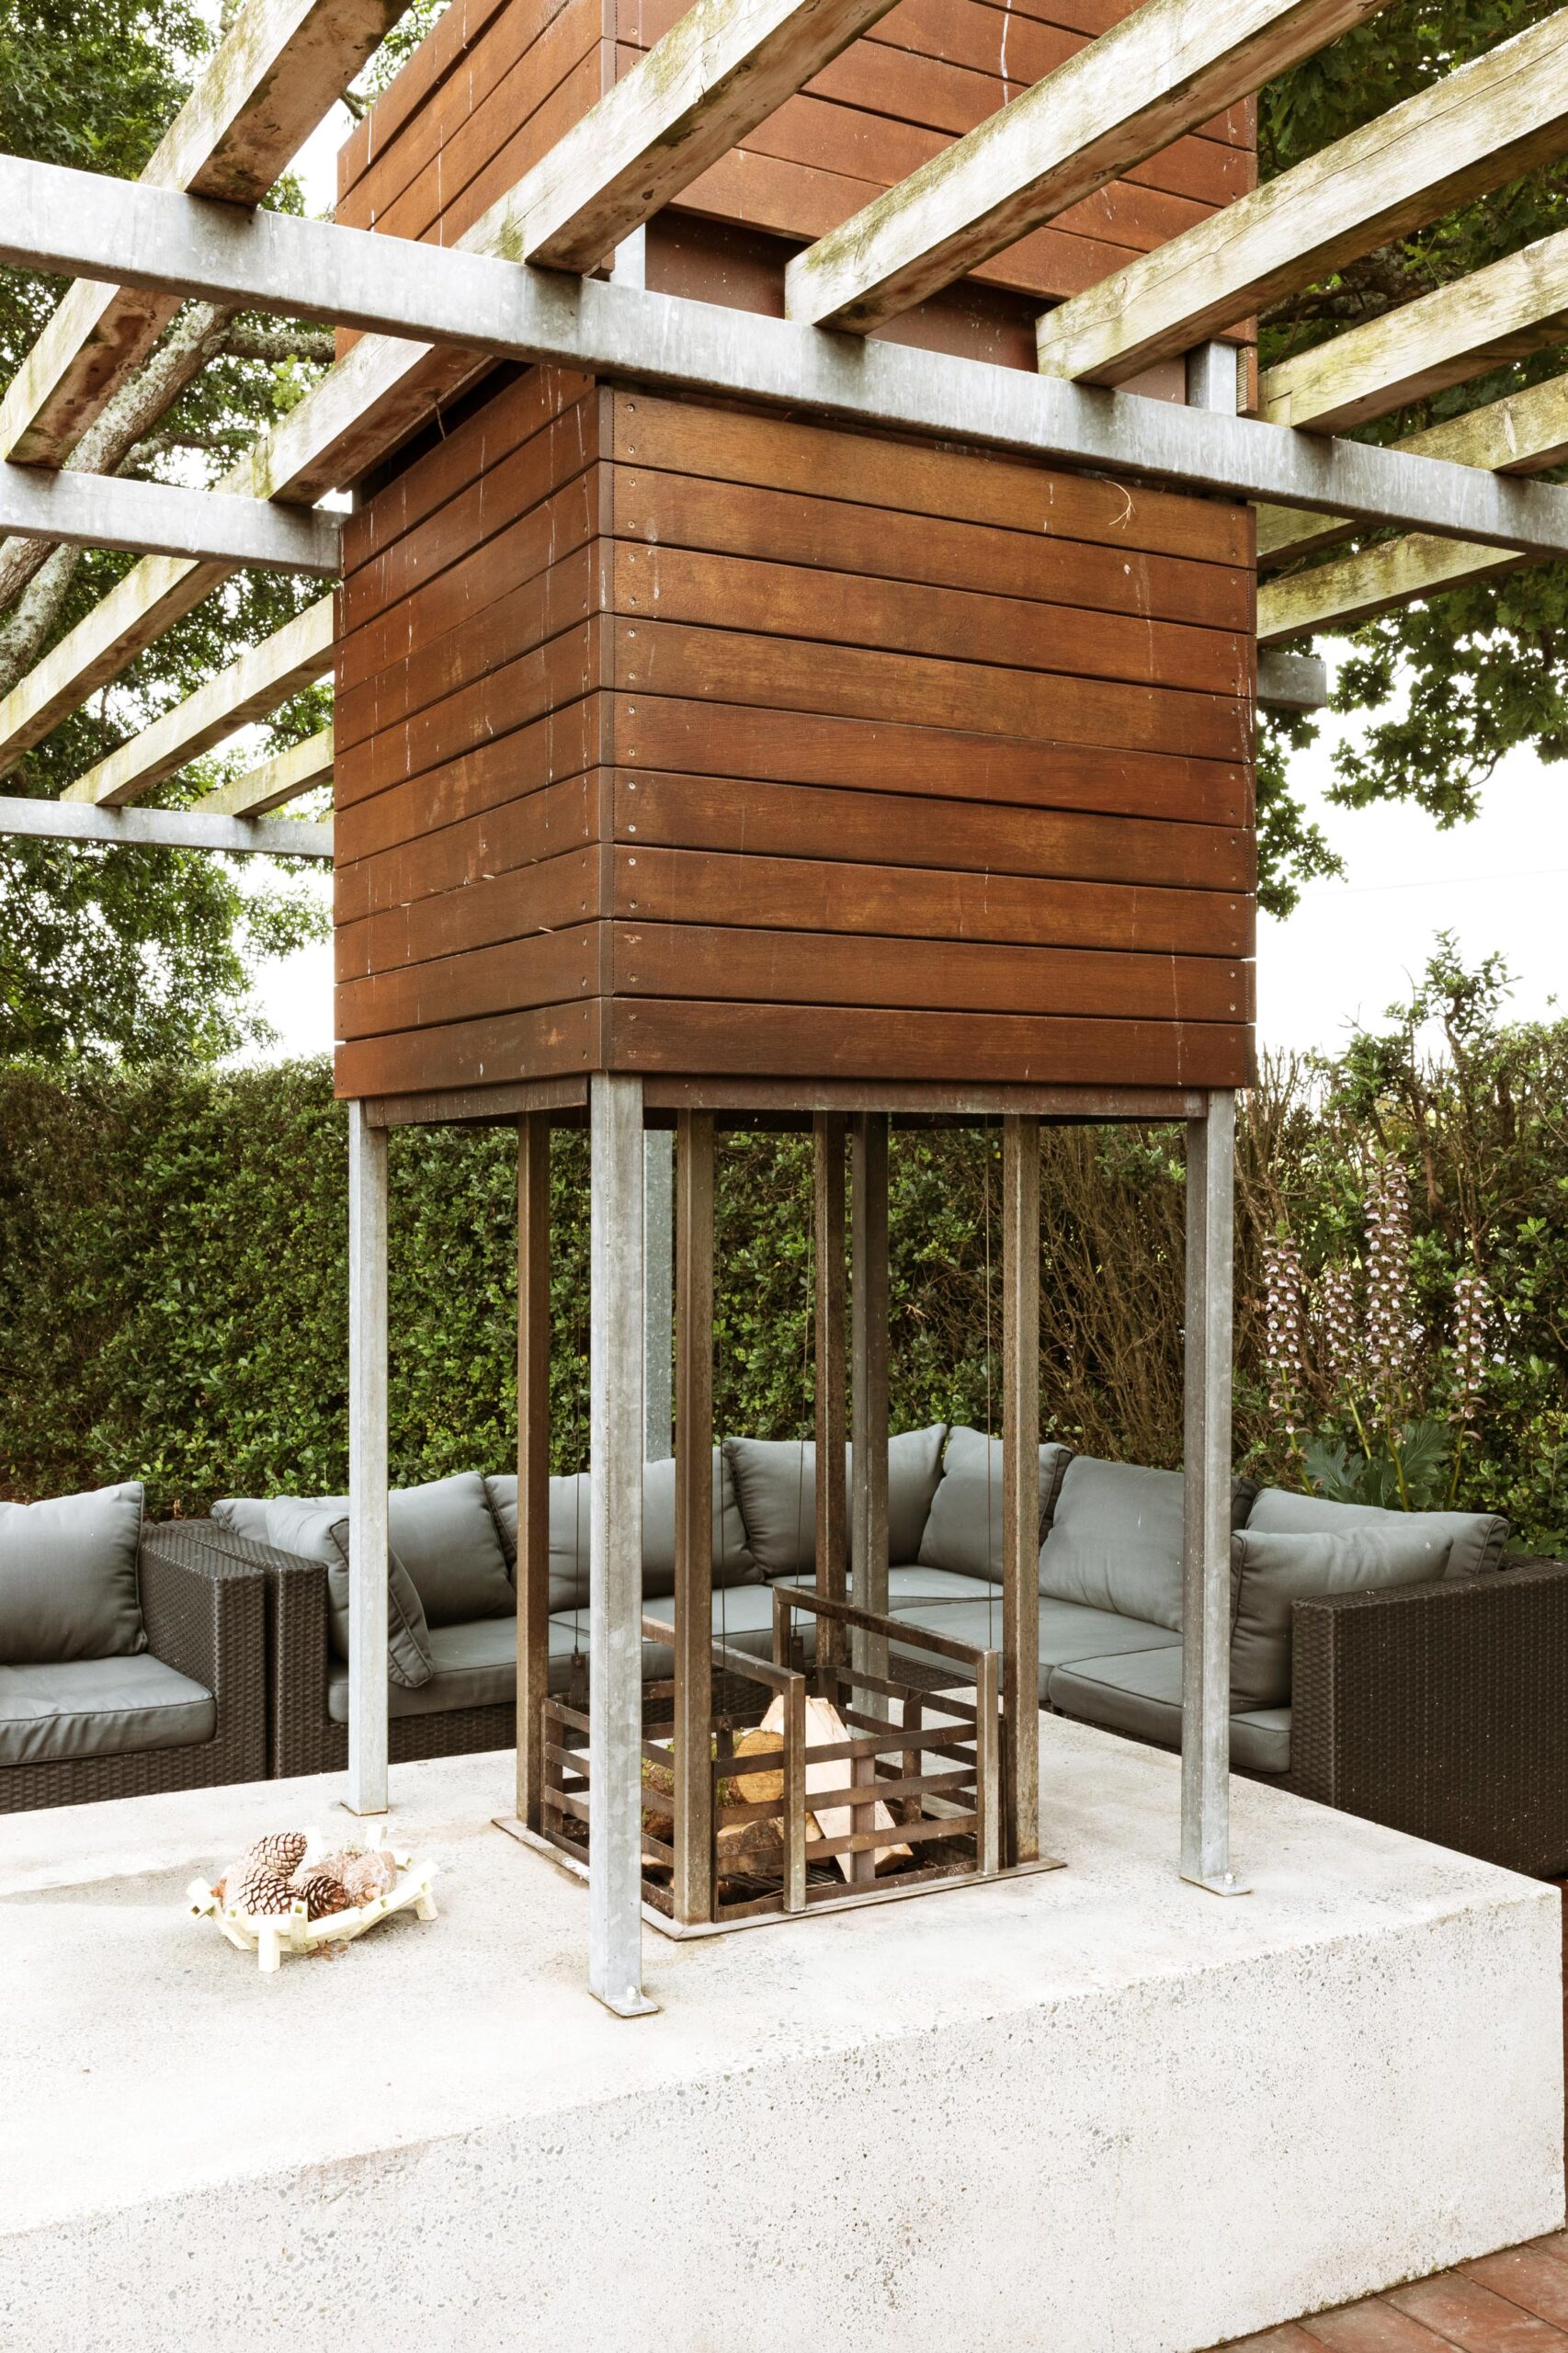 An outdoor fire-pit that has a timber chimney